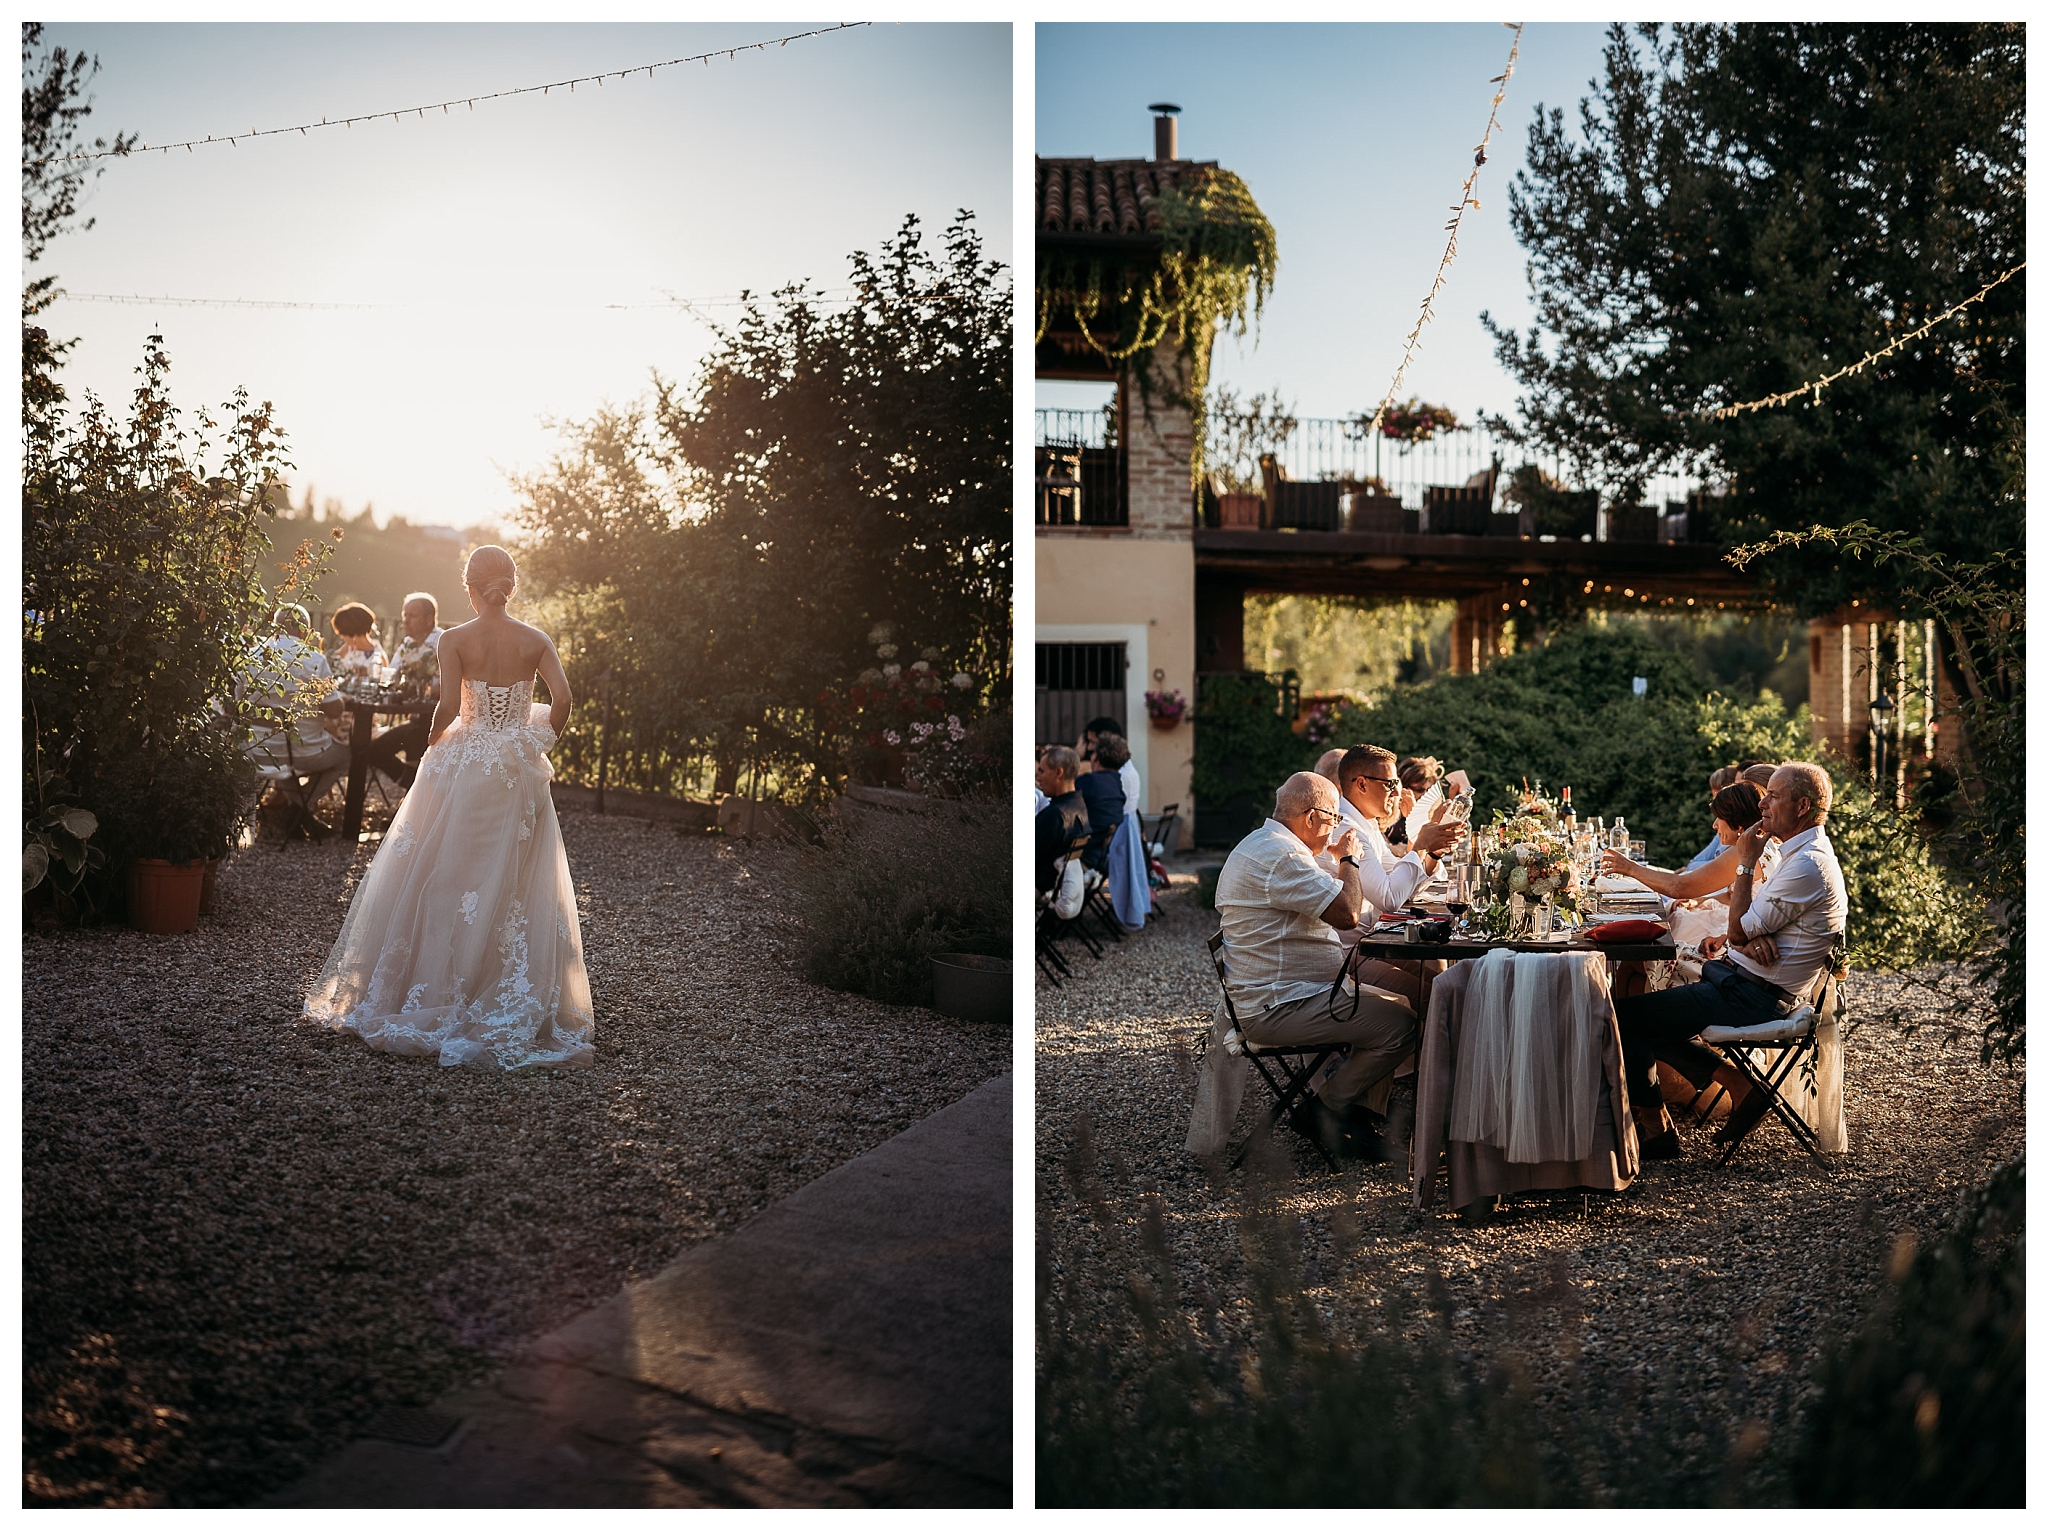 Dinner at sunset for a wedding in Italy countryside